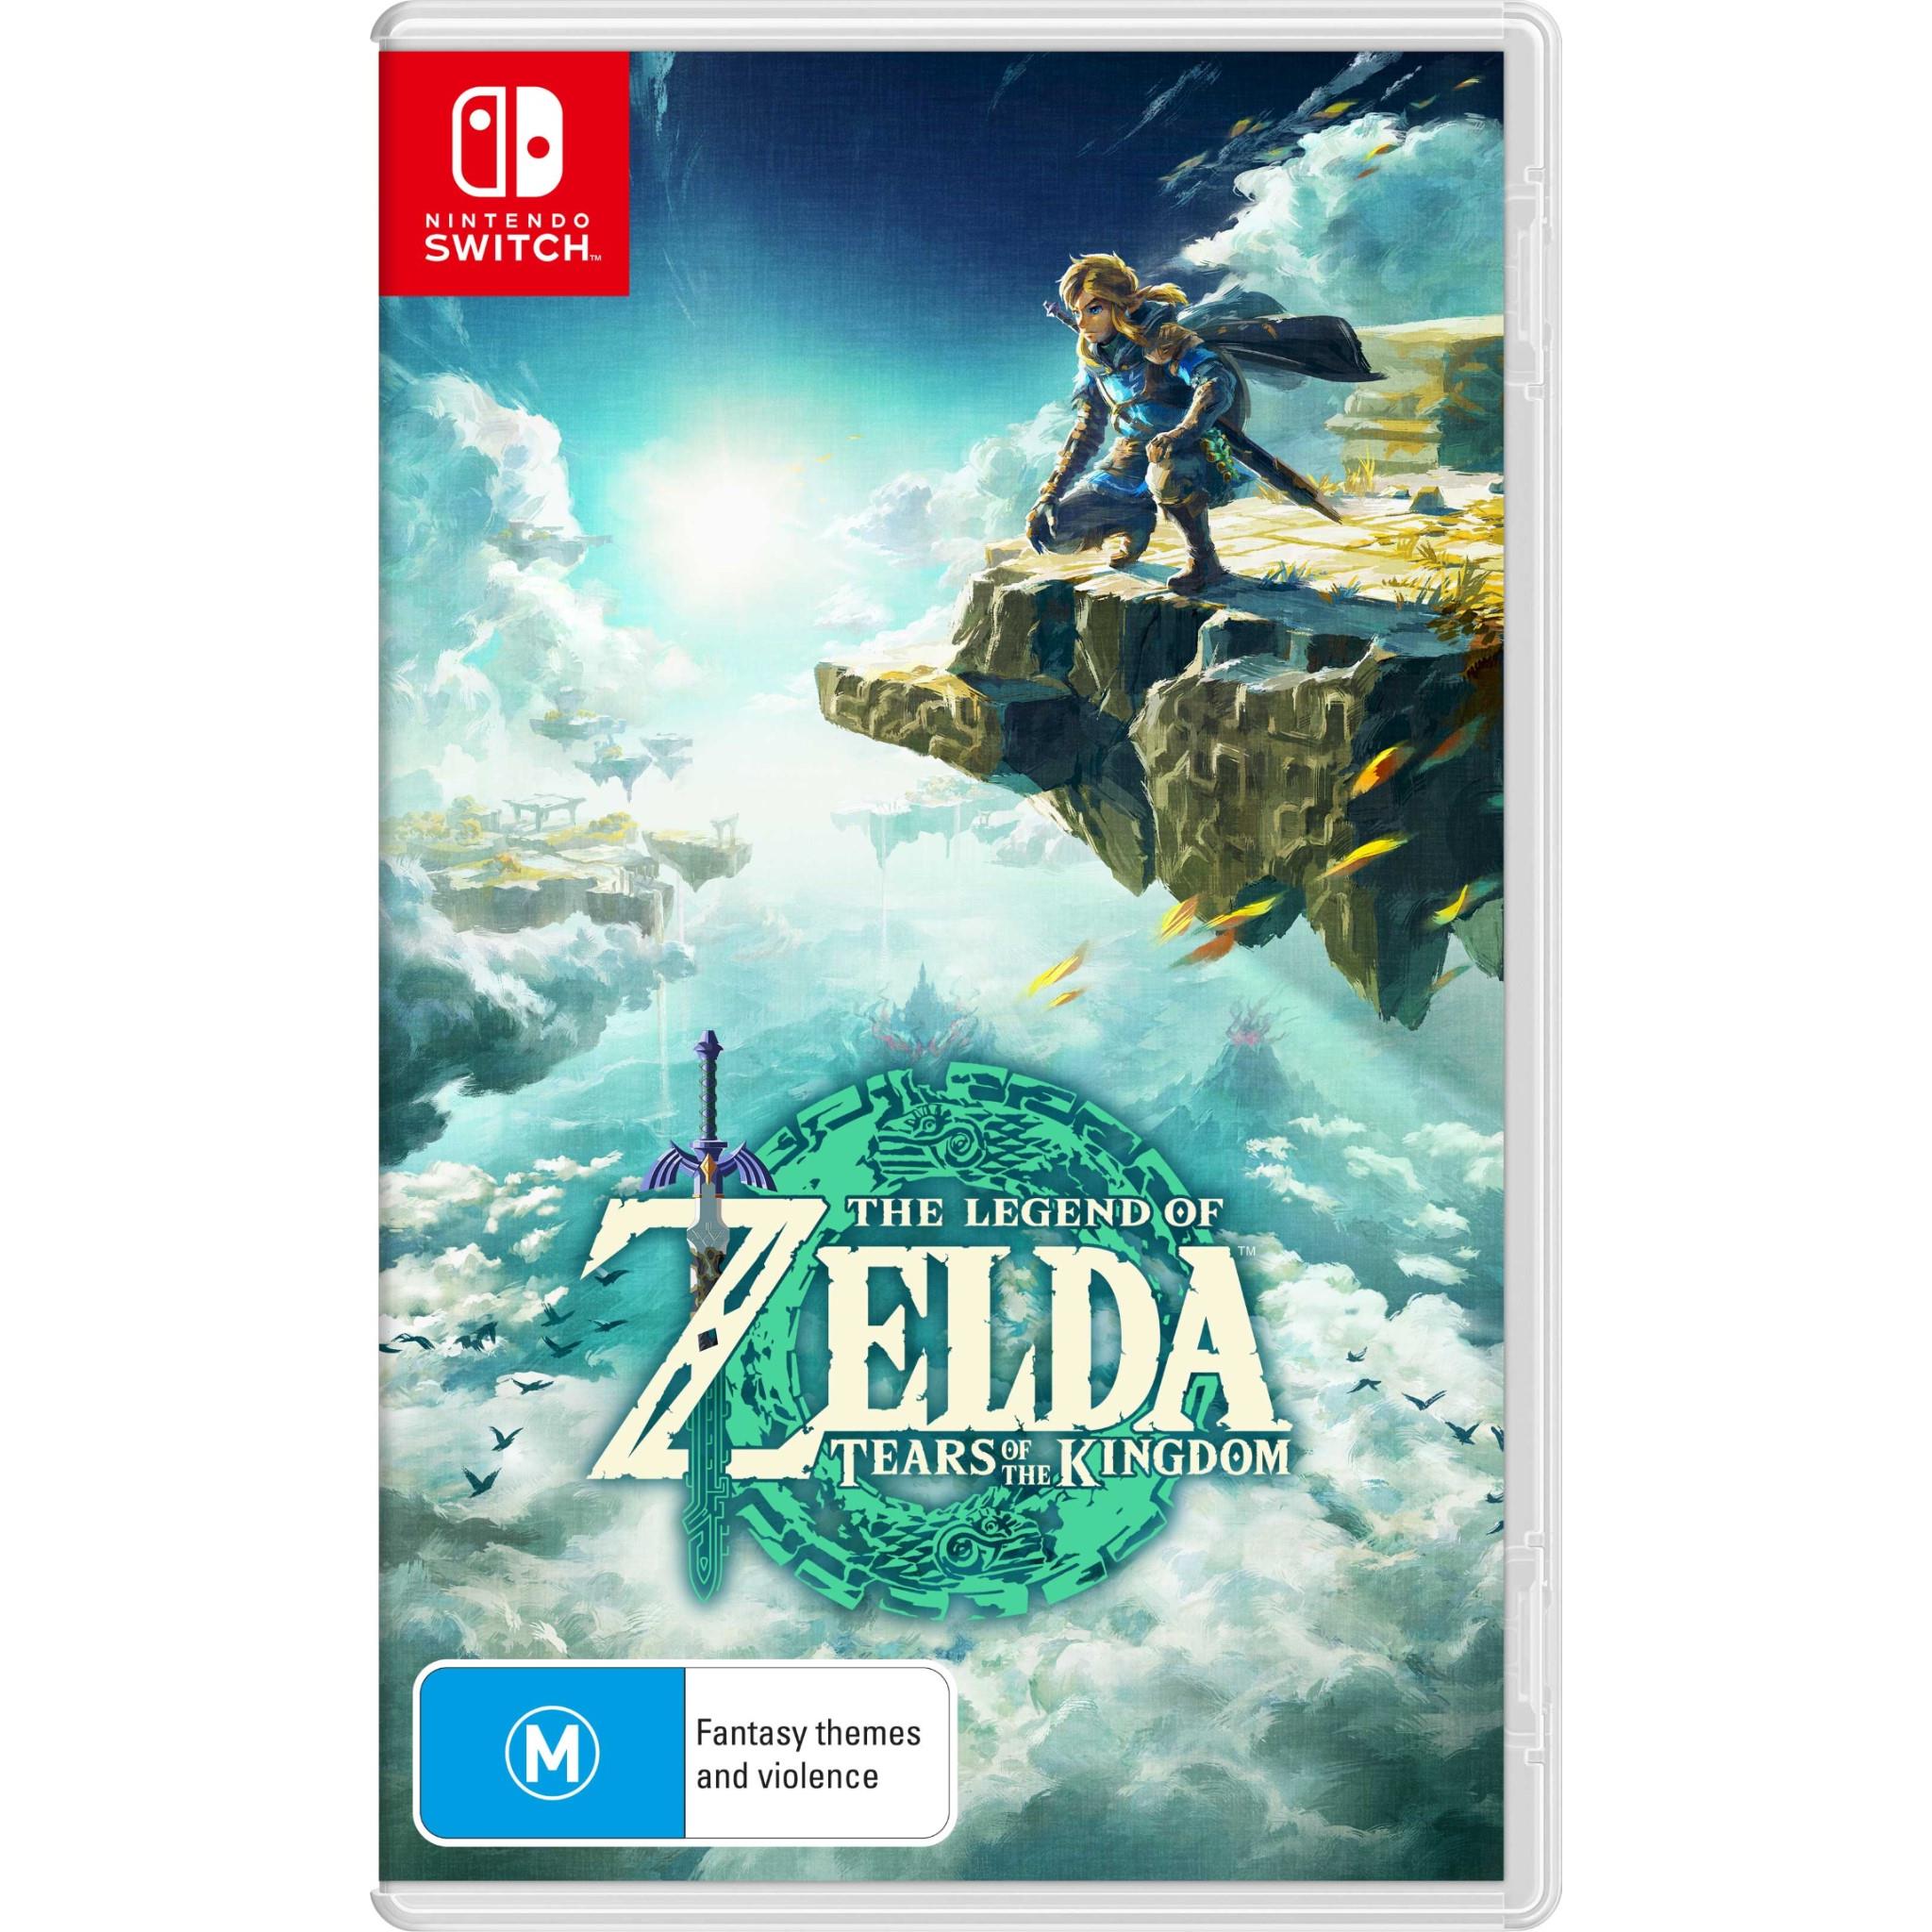 The Legend of Zelda™: Breath of the Wild for the Nintendo Switch™ home  gaming system and Wii U™ console - Expansion Pass